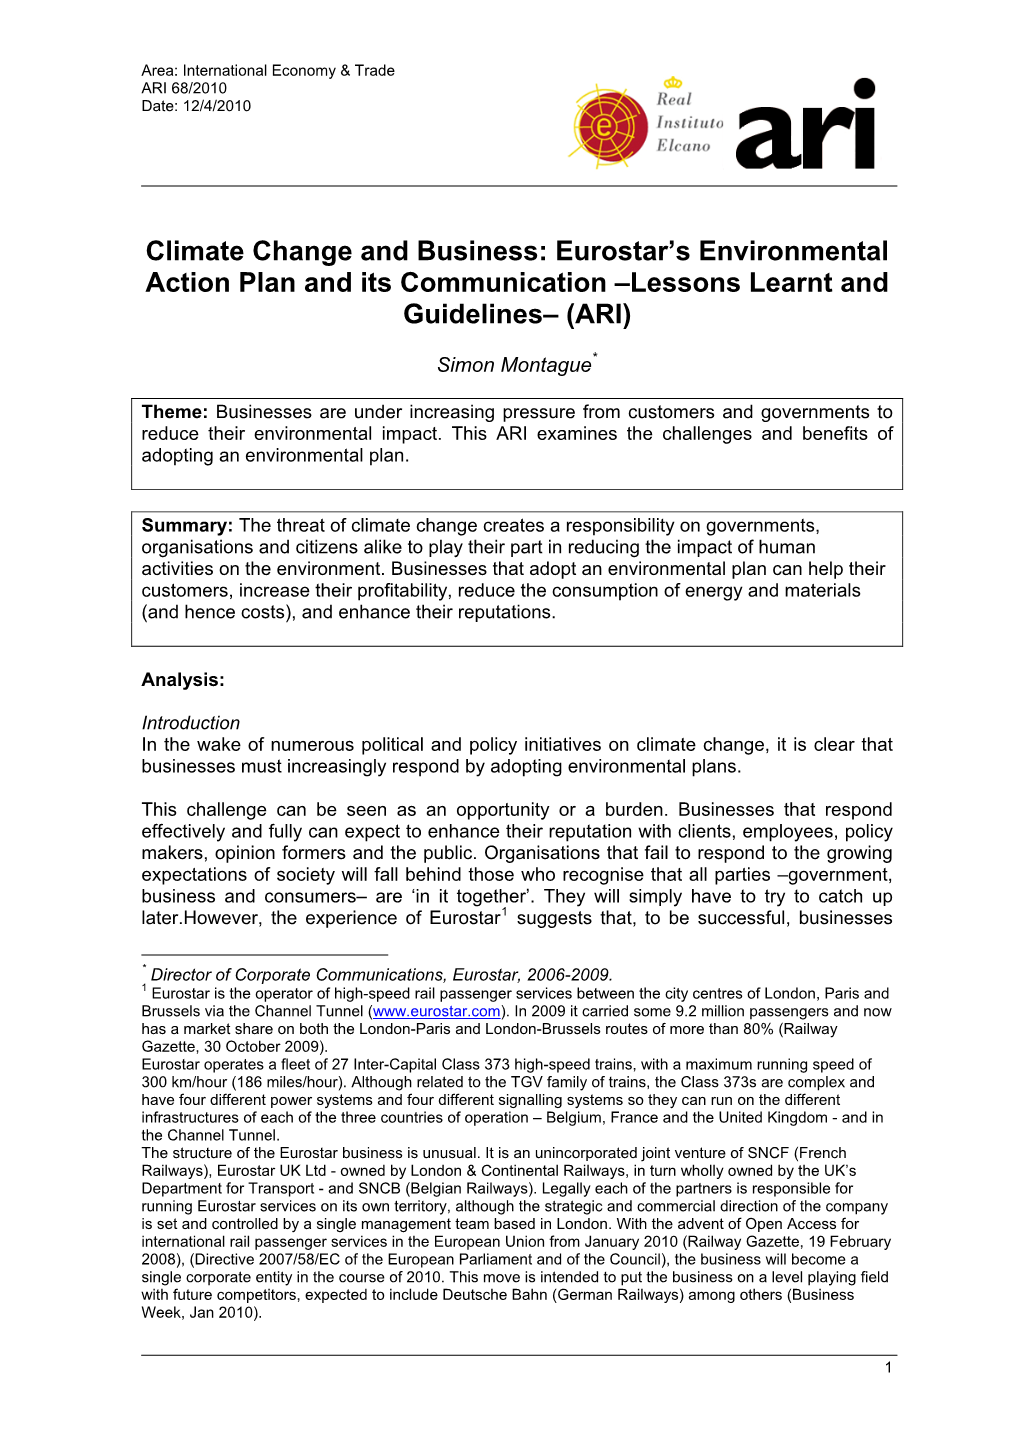 Climate Change and Business: Eurostar's Environmental Action